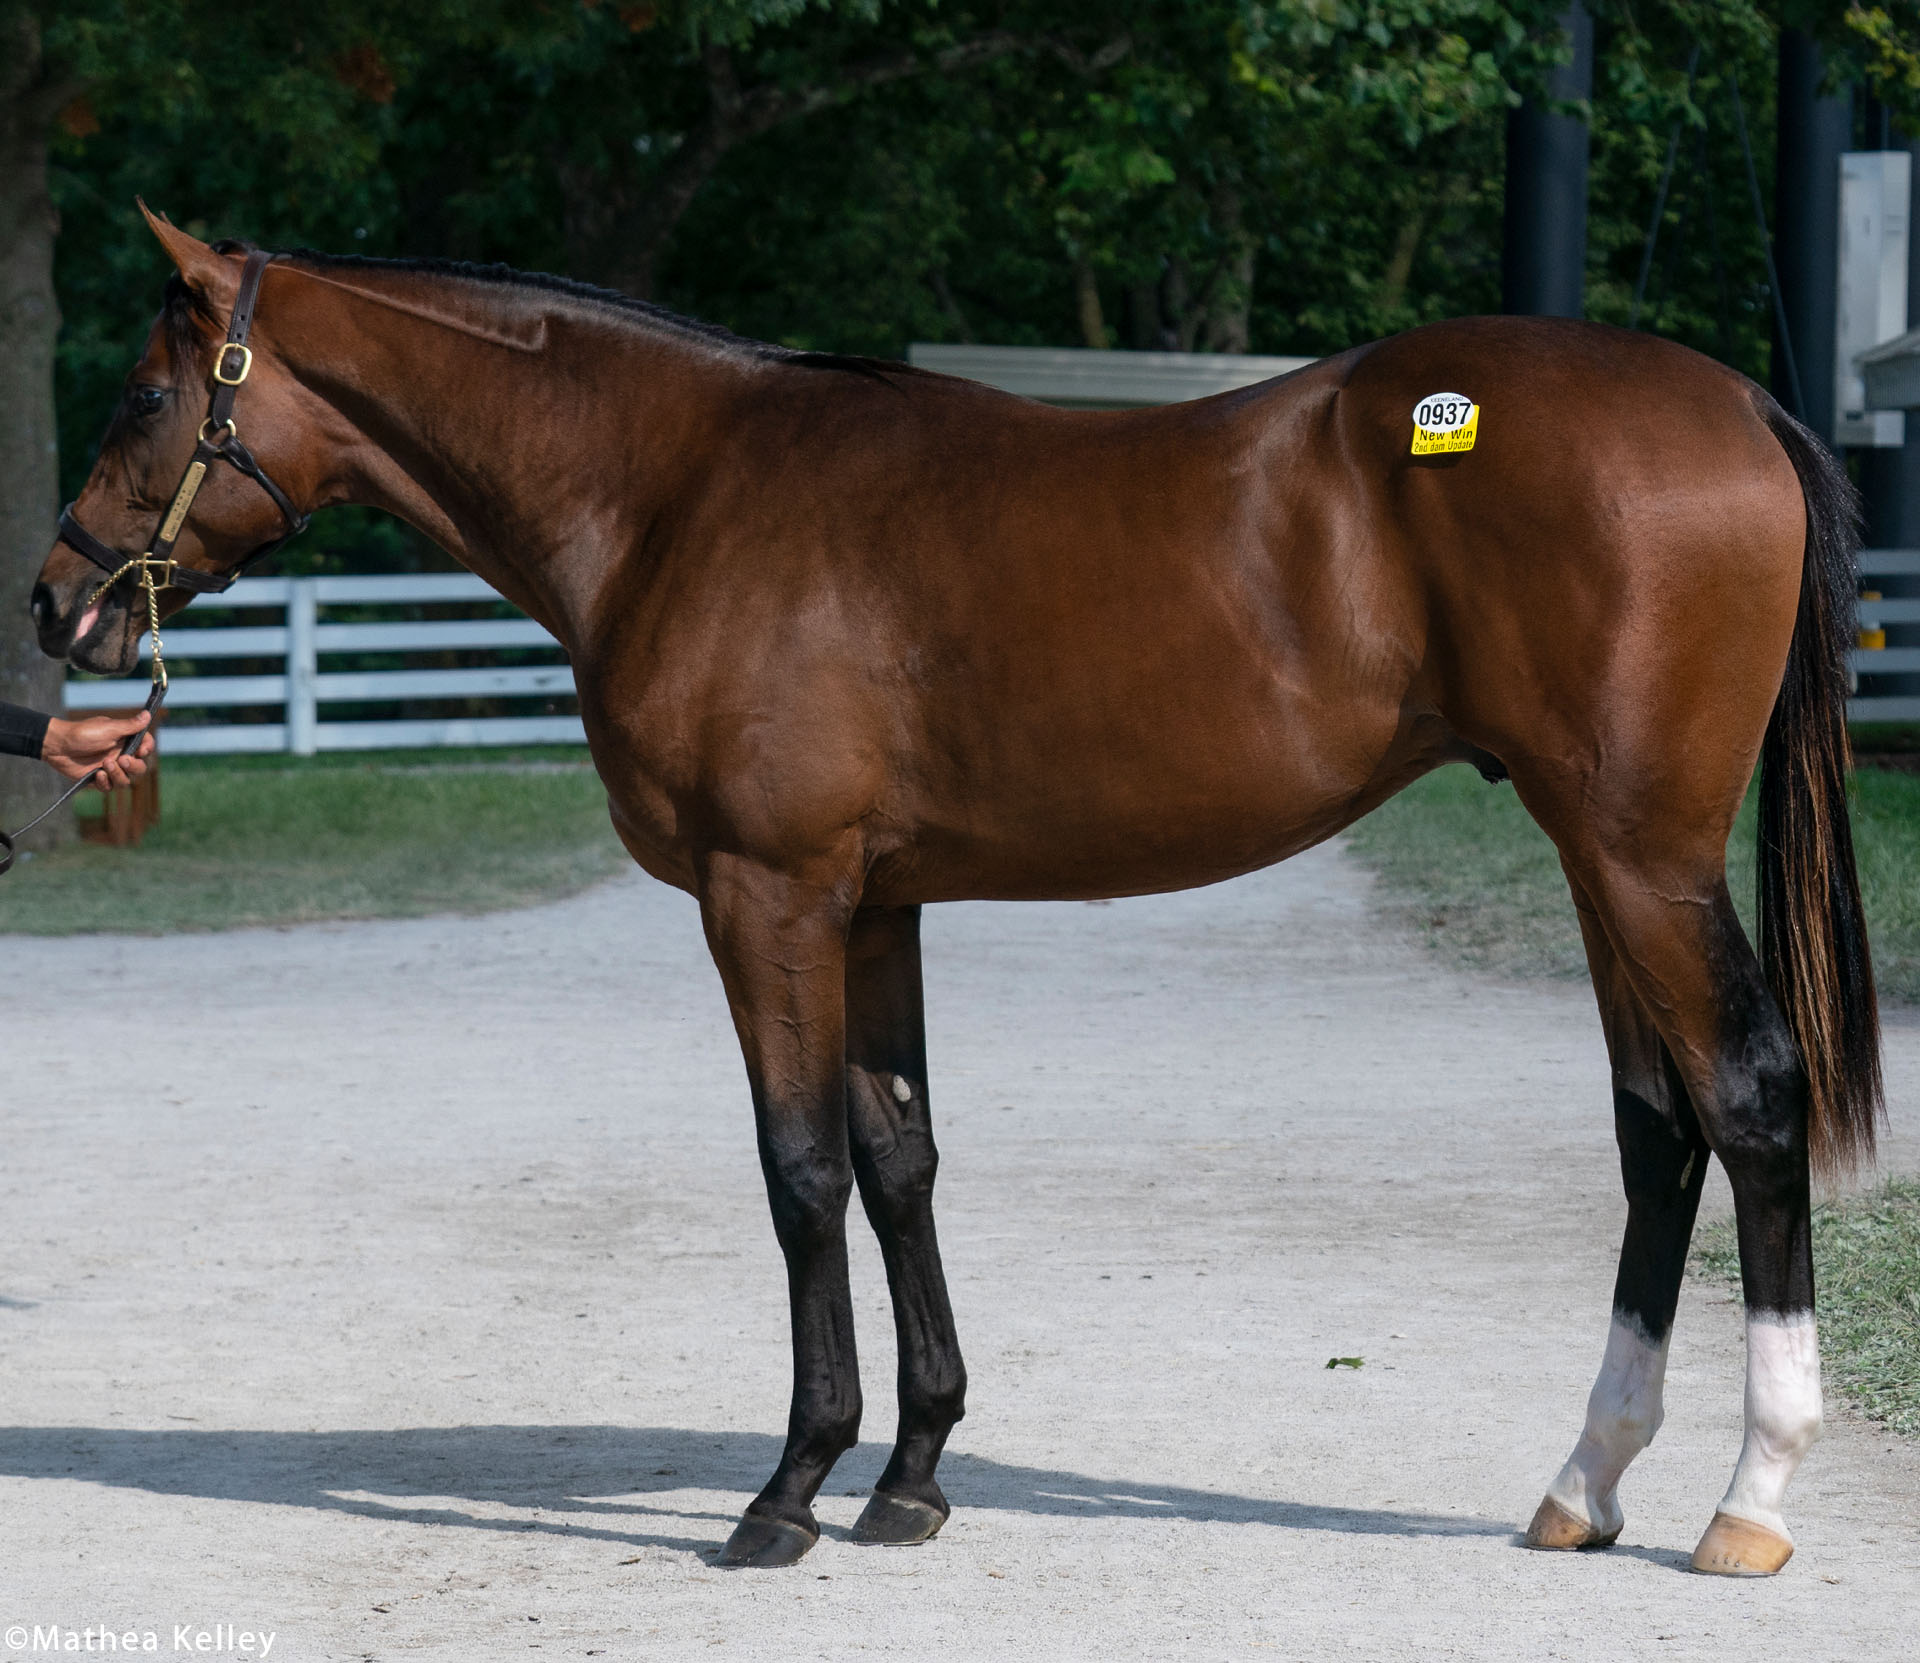 Candy Ride colt out of the Tiznow mare Well Lived, purchased at the Keeneland September Sale and available in the Elmont thoroughbred racing partnership.